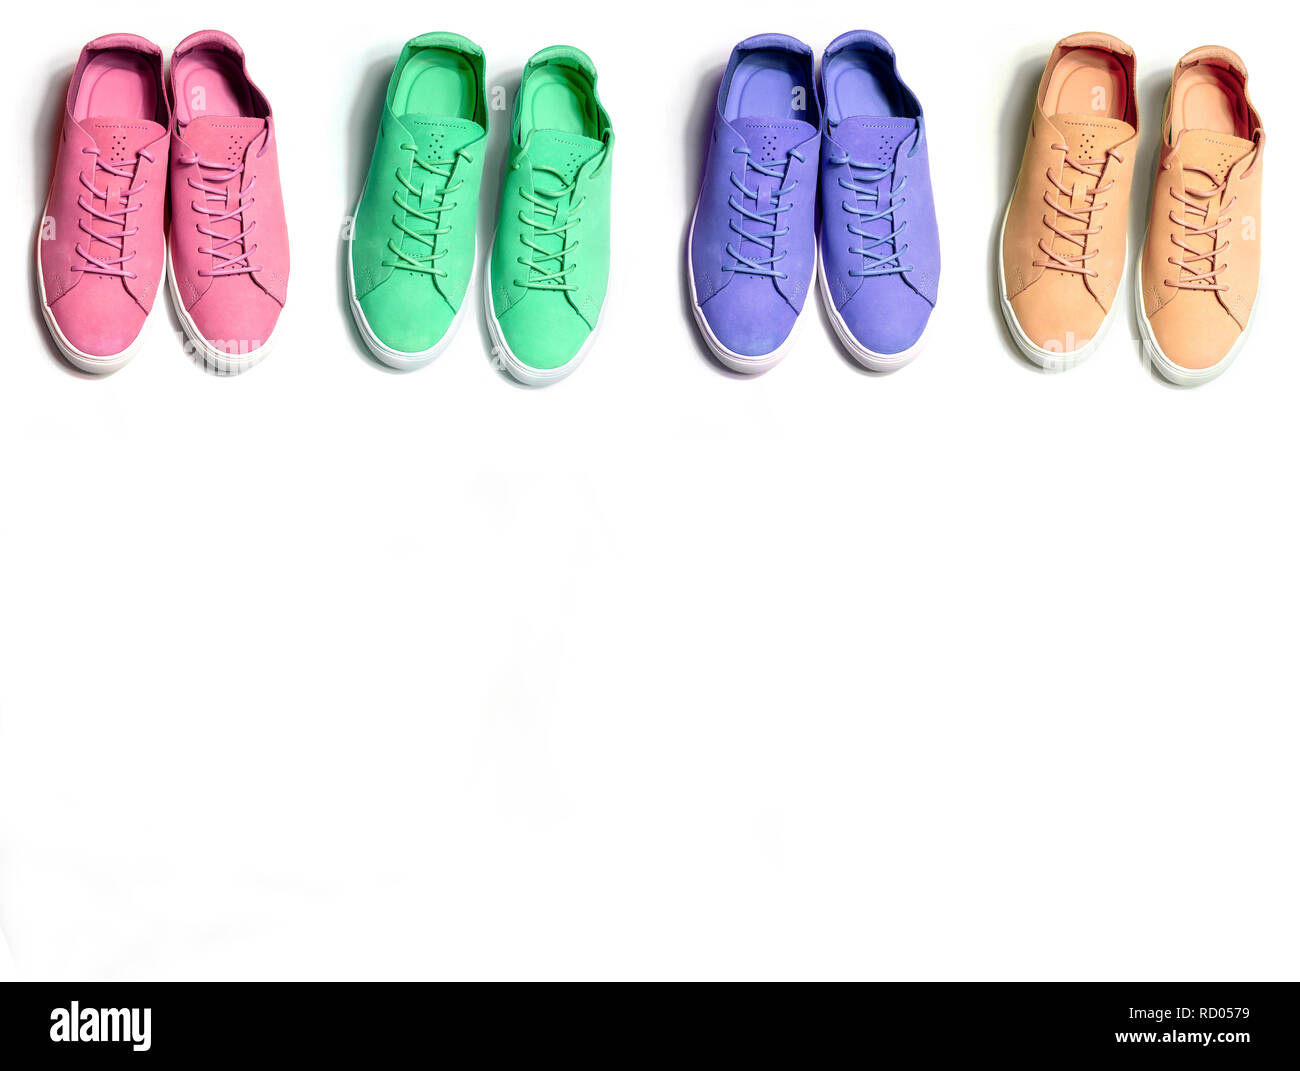 4 colorful woman sneaker shoes on white background Stock Photo